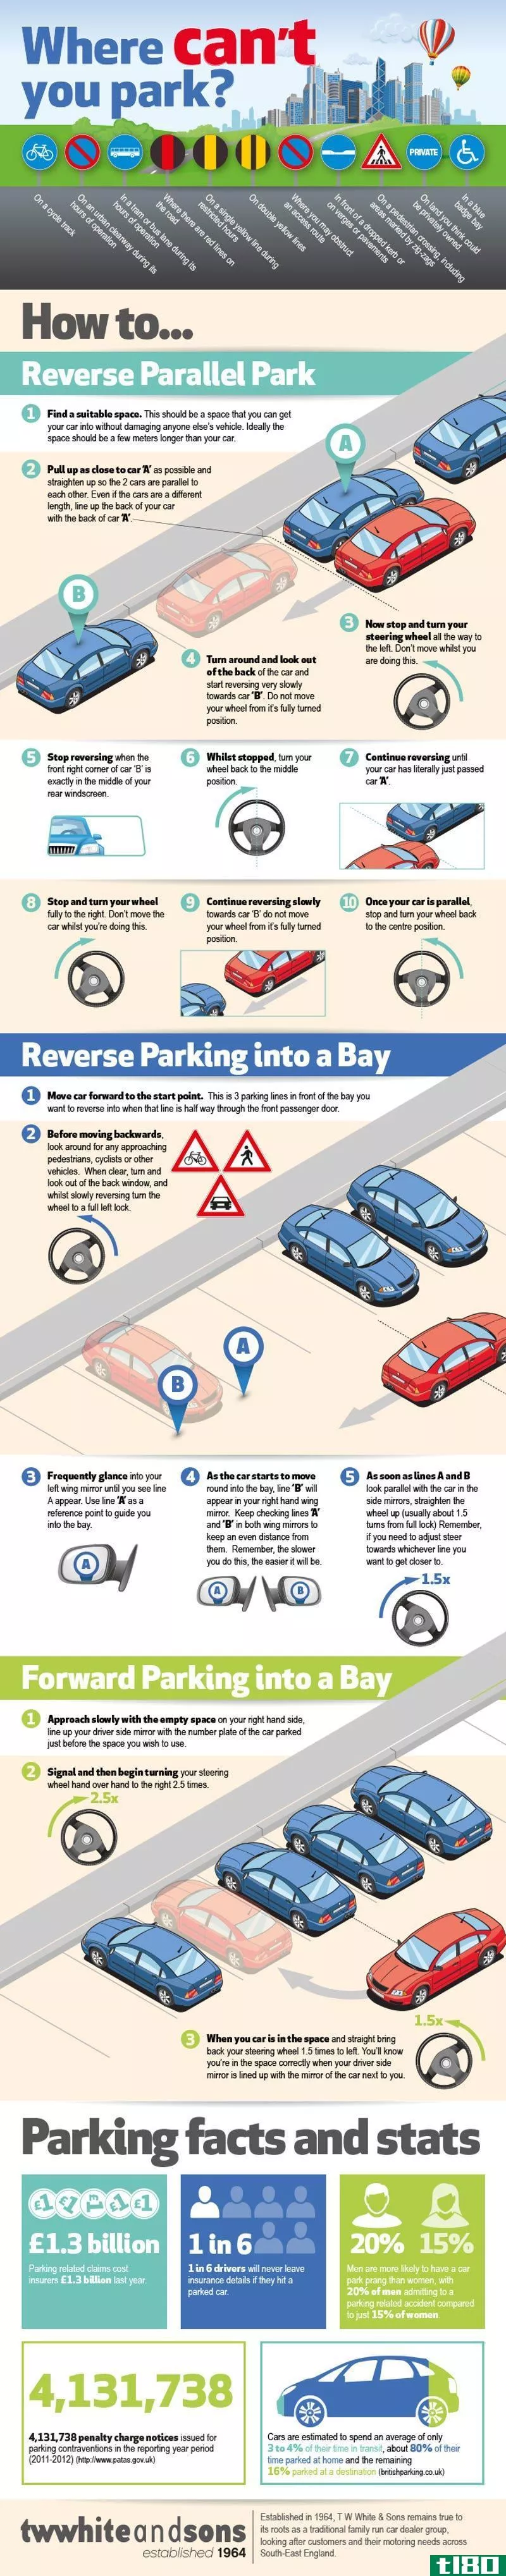 Illustration for article titled Make Parking a Cinch with This Parking Guide Infographic